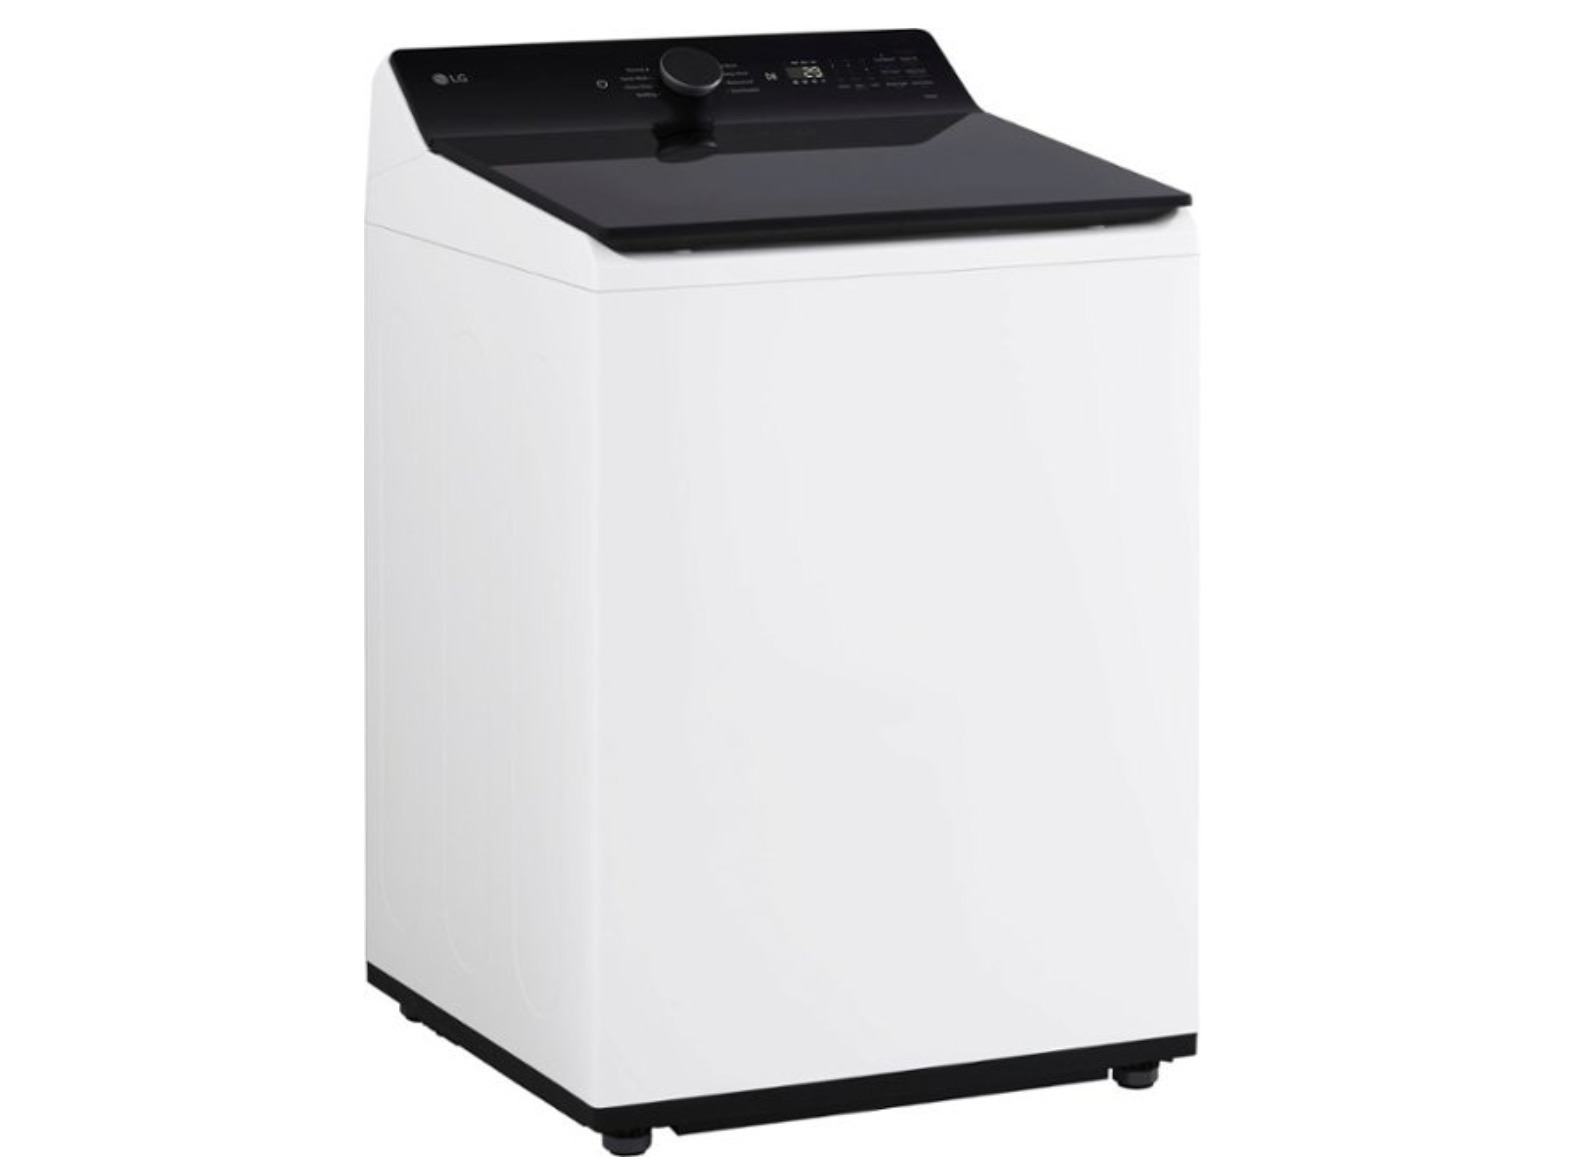 LG 5.5 Cubic Foot High-Efficiency Smart Top Load Washer